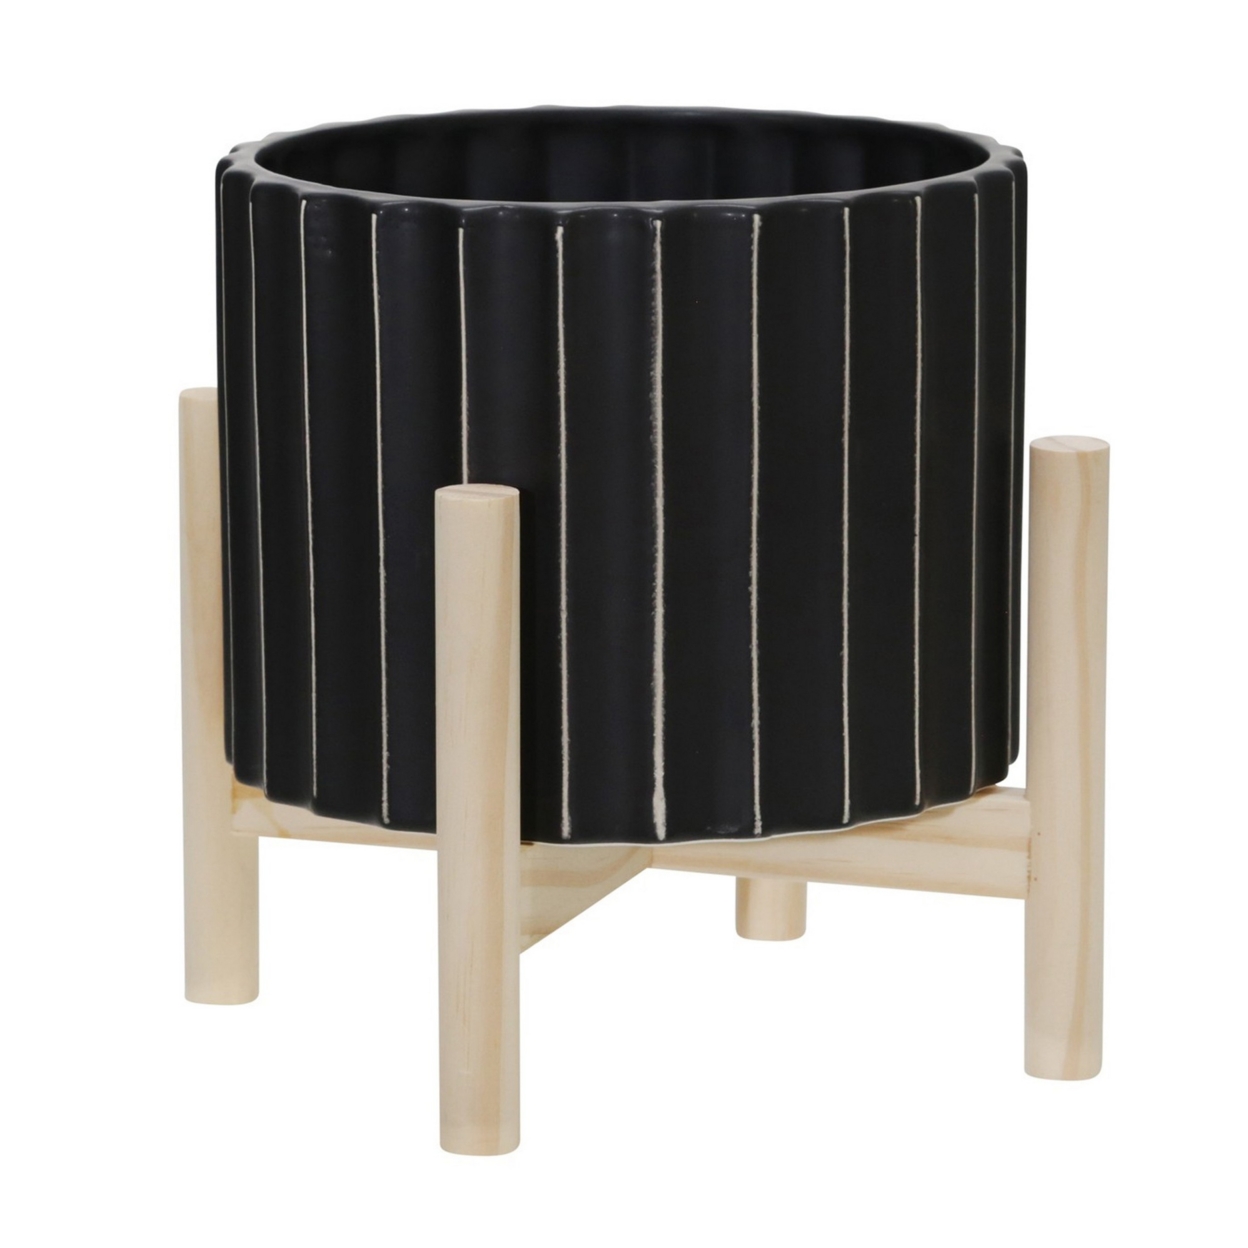 Planter With Fluted Pattern And Wooden Stand, Black- Saltoro Sherpi